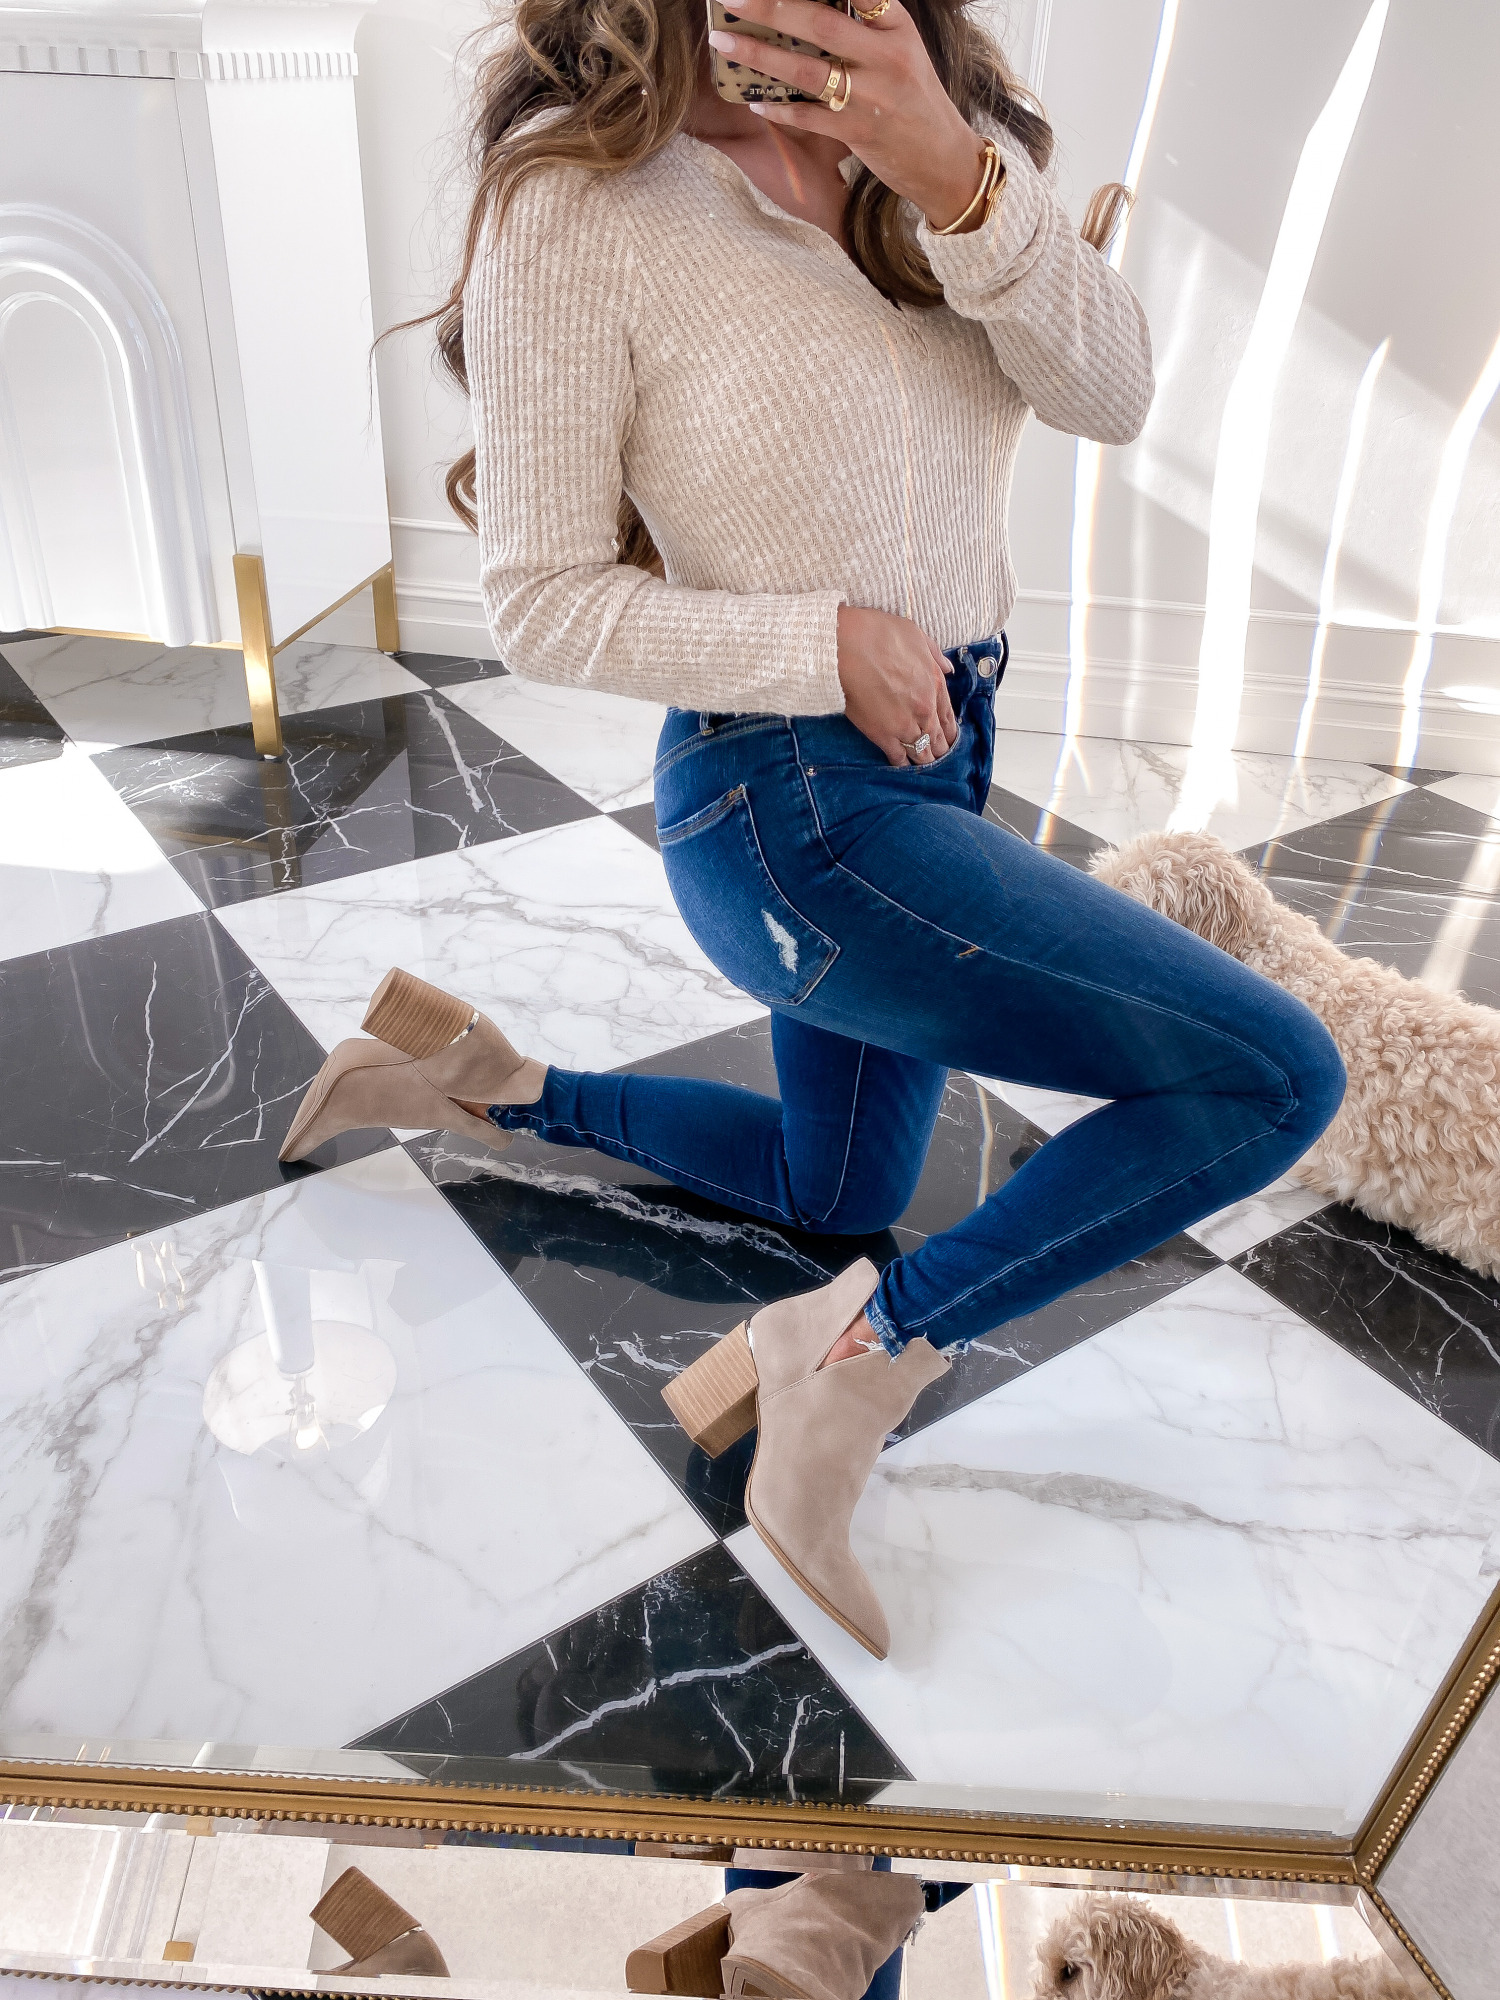 Nsale 2020 blog post must haves picks, nsale 2020 fashion blogger, emily gemma | Nordstrom Anniversary Sale by popular US fashion blog, The Sweetest Thing: image of Emily Gemma wearing a Kaylah Pointed Toe Bootie STEVE MADDEN, Good American Good Legs High Waist Raw Hem Skinny Jeans, and Long Sleeve Thermal Henley Top SOCIALITE.